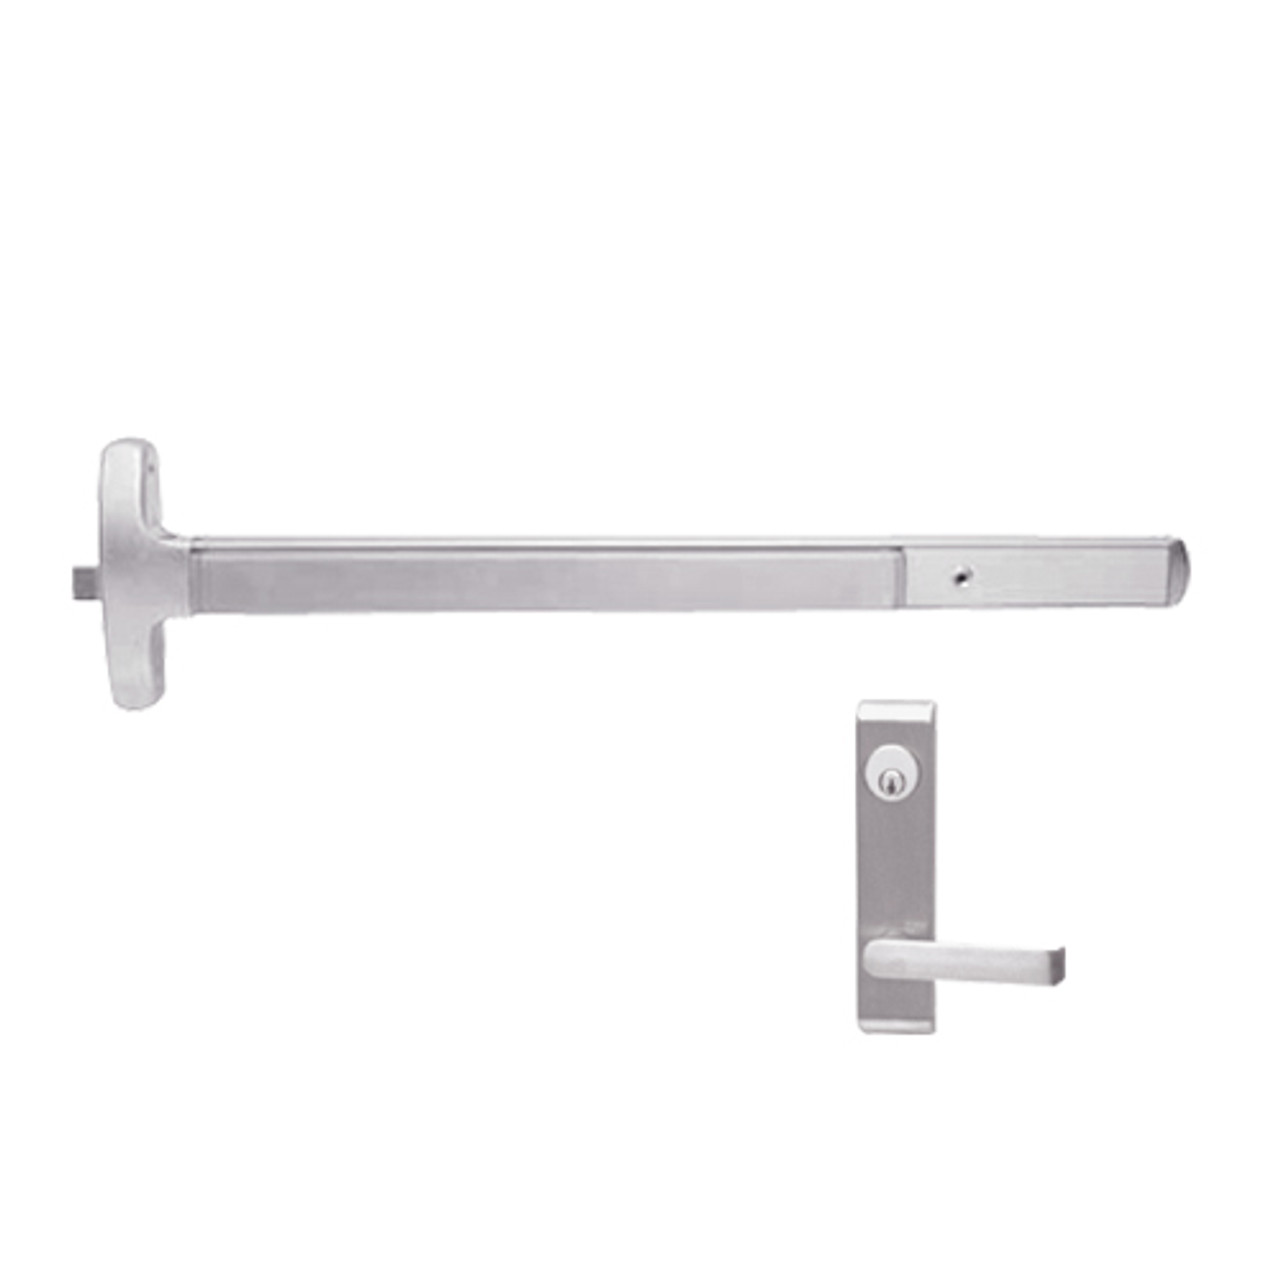 24-R-L-DANE-US32-4-LHR Falcon Exit Device in Polished Stainless Steel